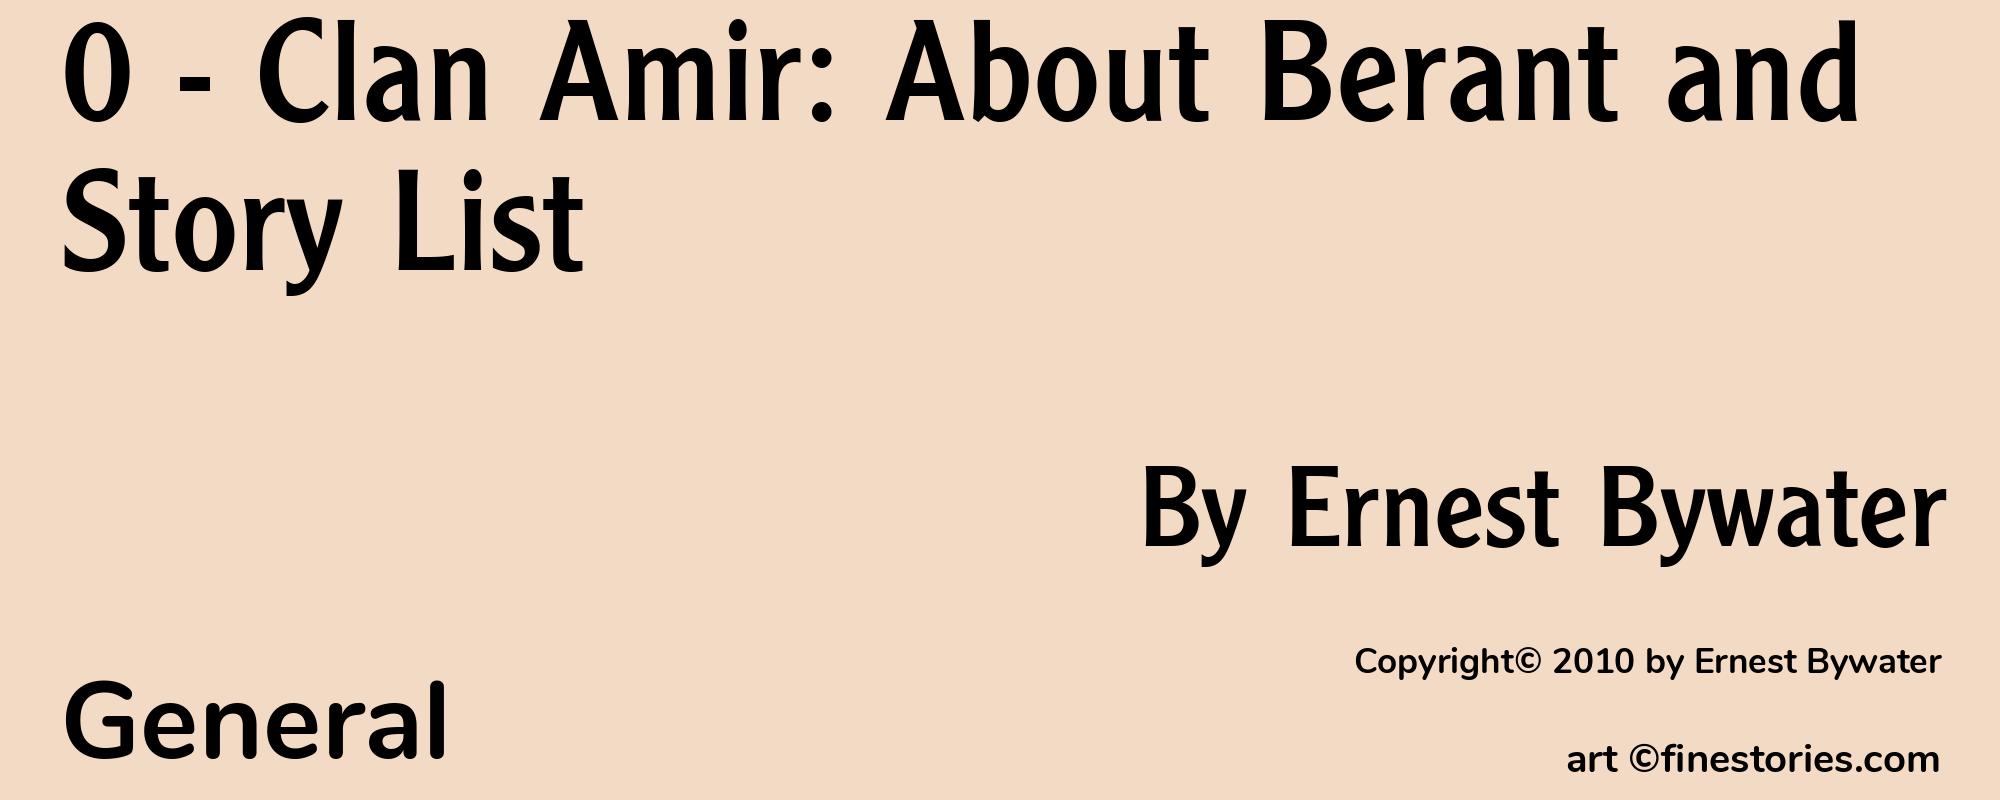 0 - Clan Amir: About Berant and Story List - Cover